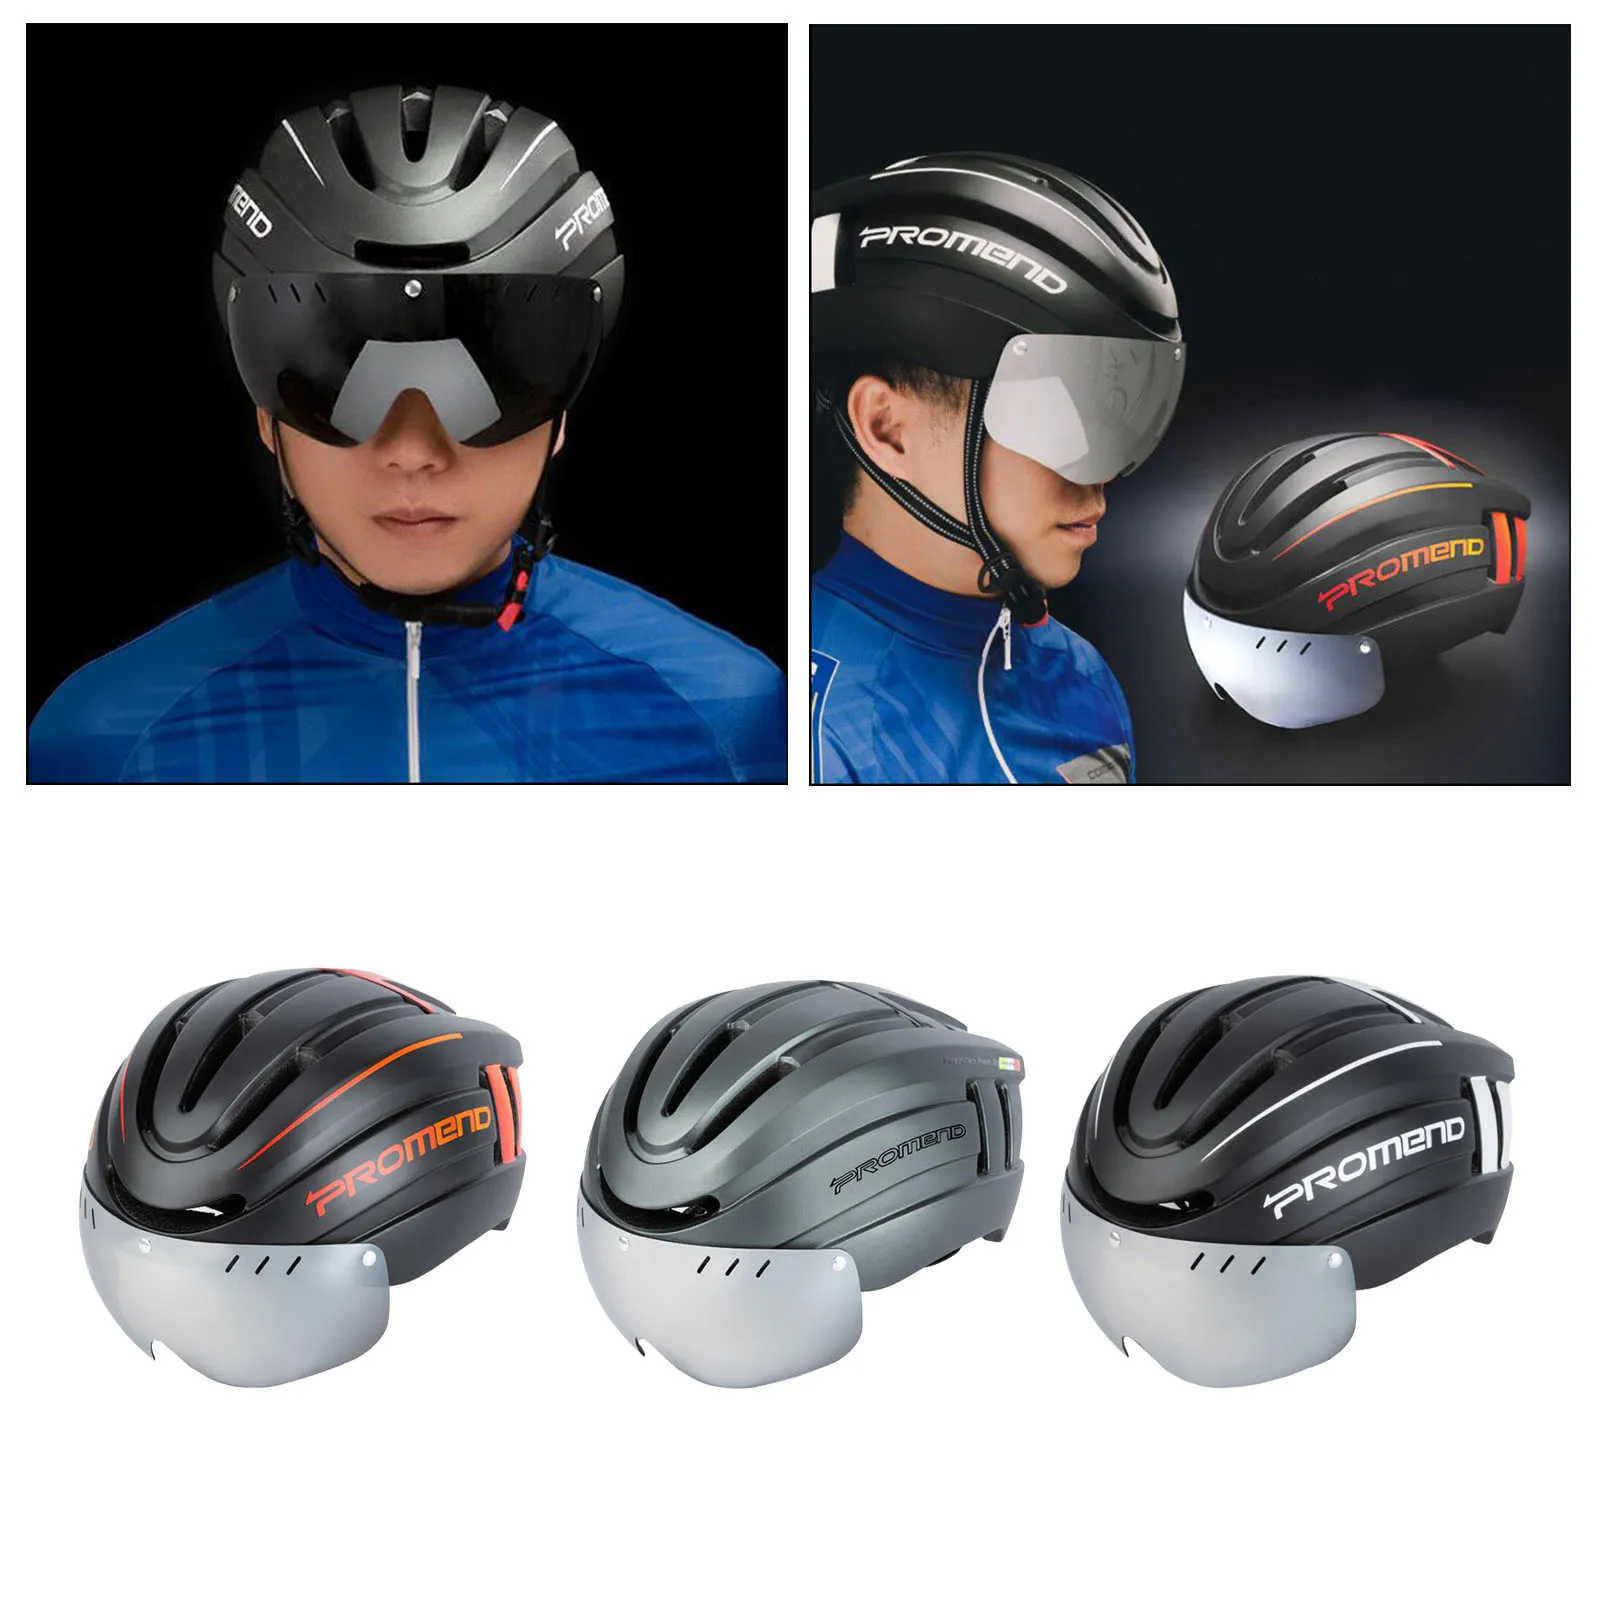 Sport Adult Cycling Signal Light Lamp Helmet with Removable Lens and Tail Light Mountain Bike Helmet Light Weight 318g